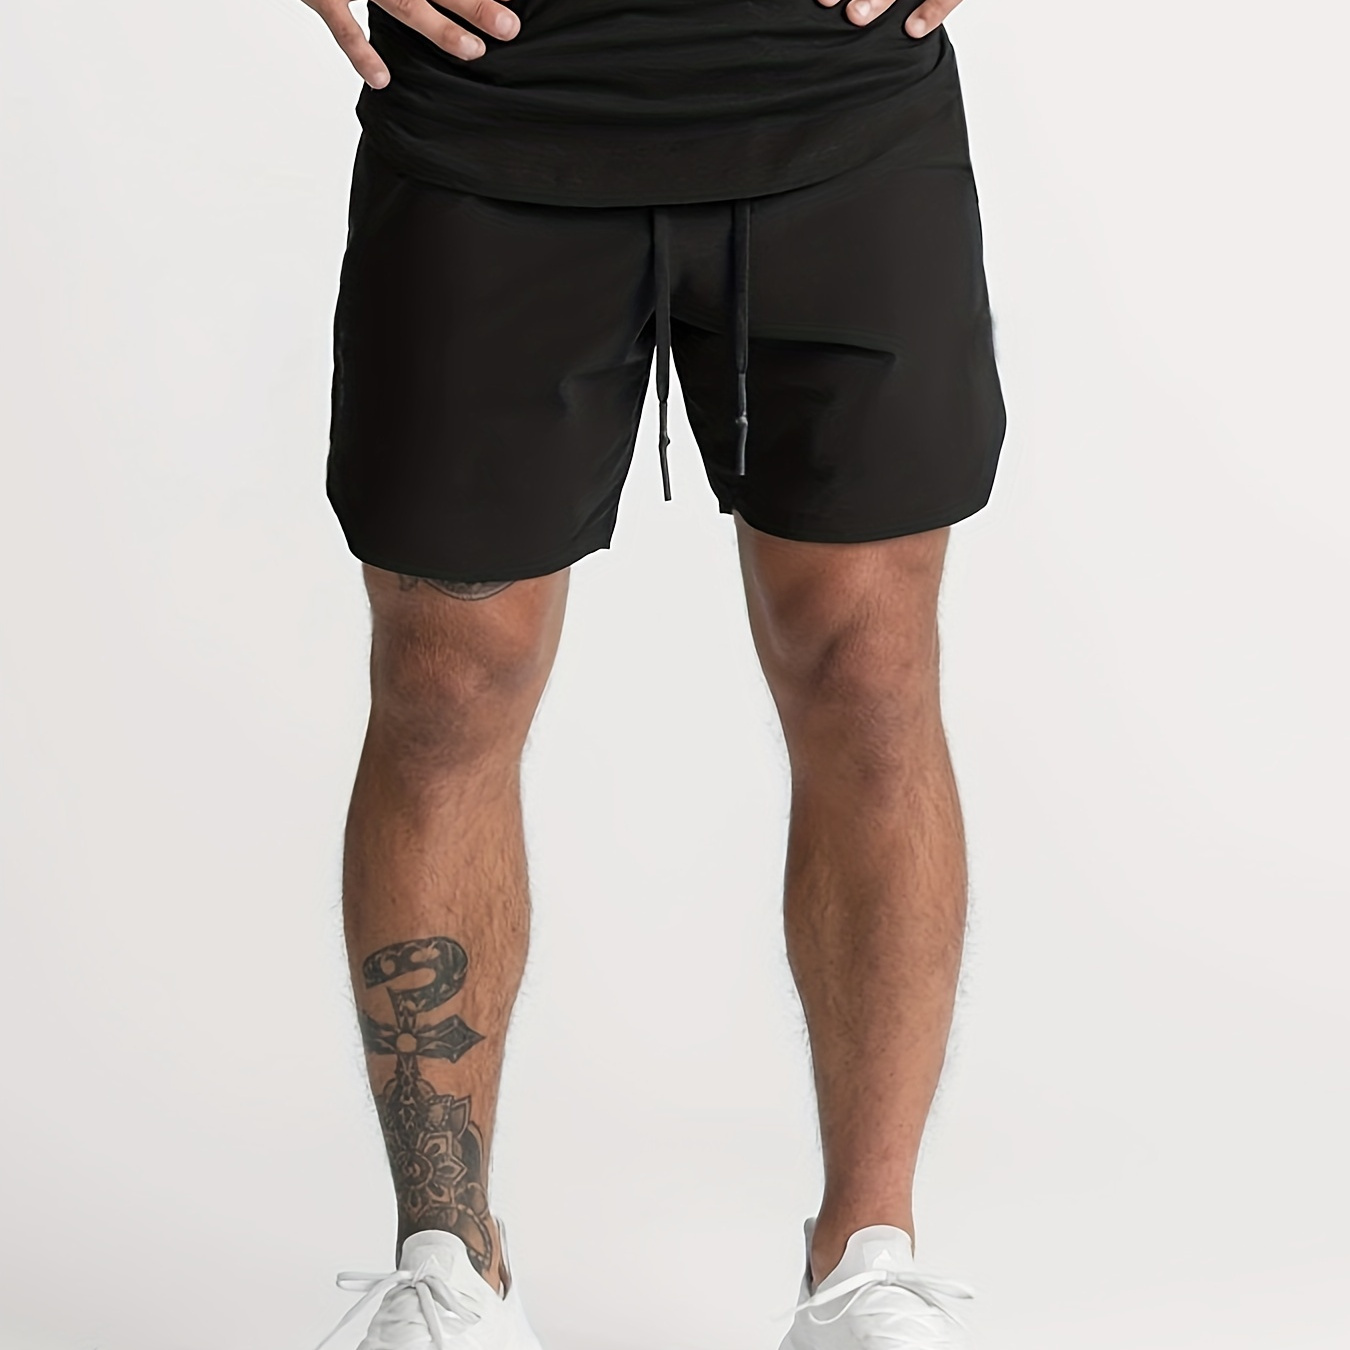 

Men's Solid Color Sports Shorts With Zippered Pockets, Quick Dry And Comfy Shorts For Summer Fitness And Outdoors Sports Wear